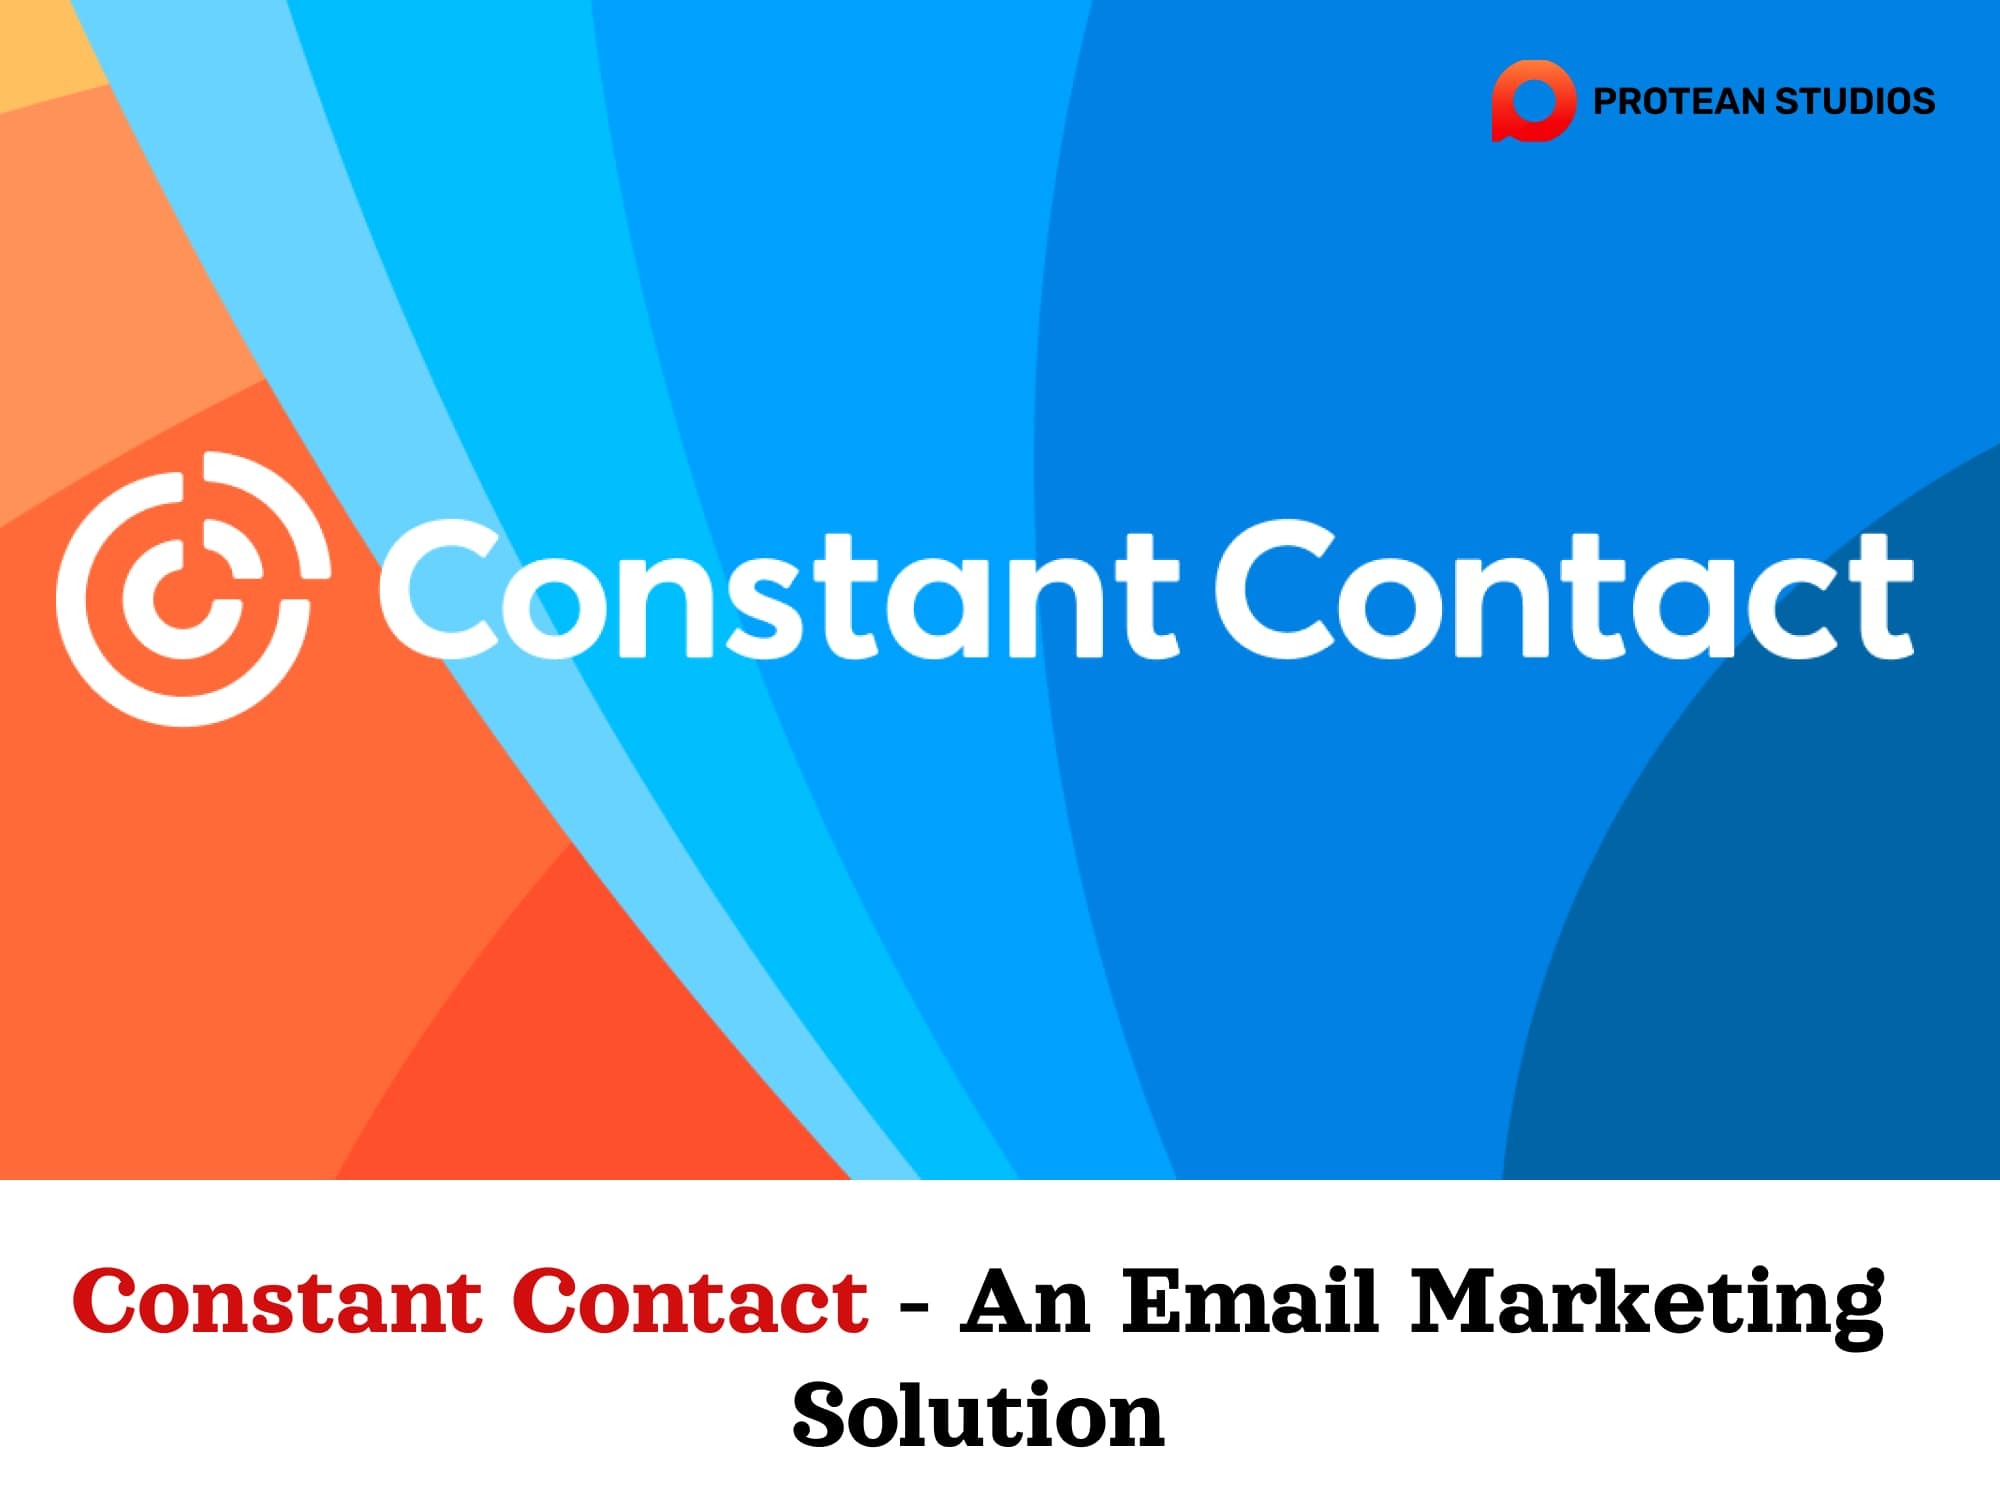 Email Marketing Solution with Constant Contact